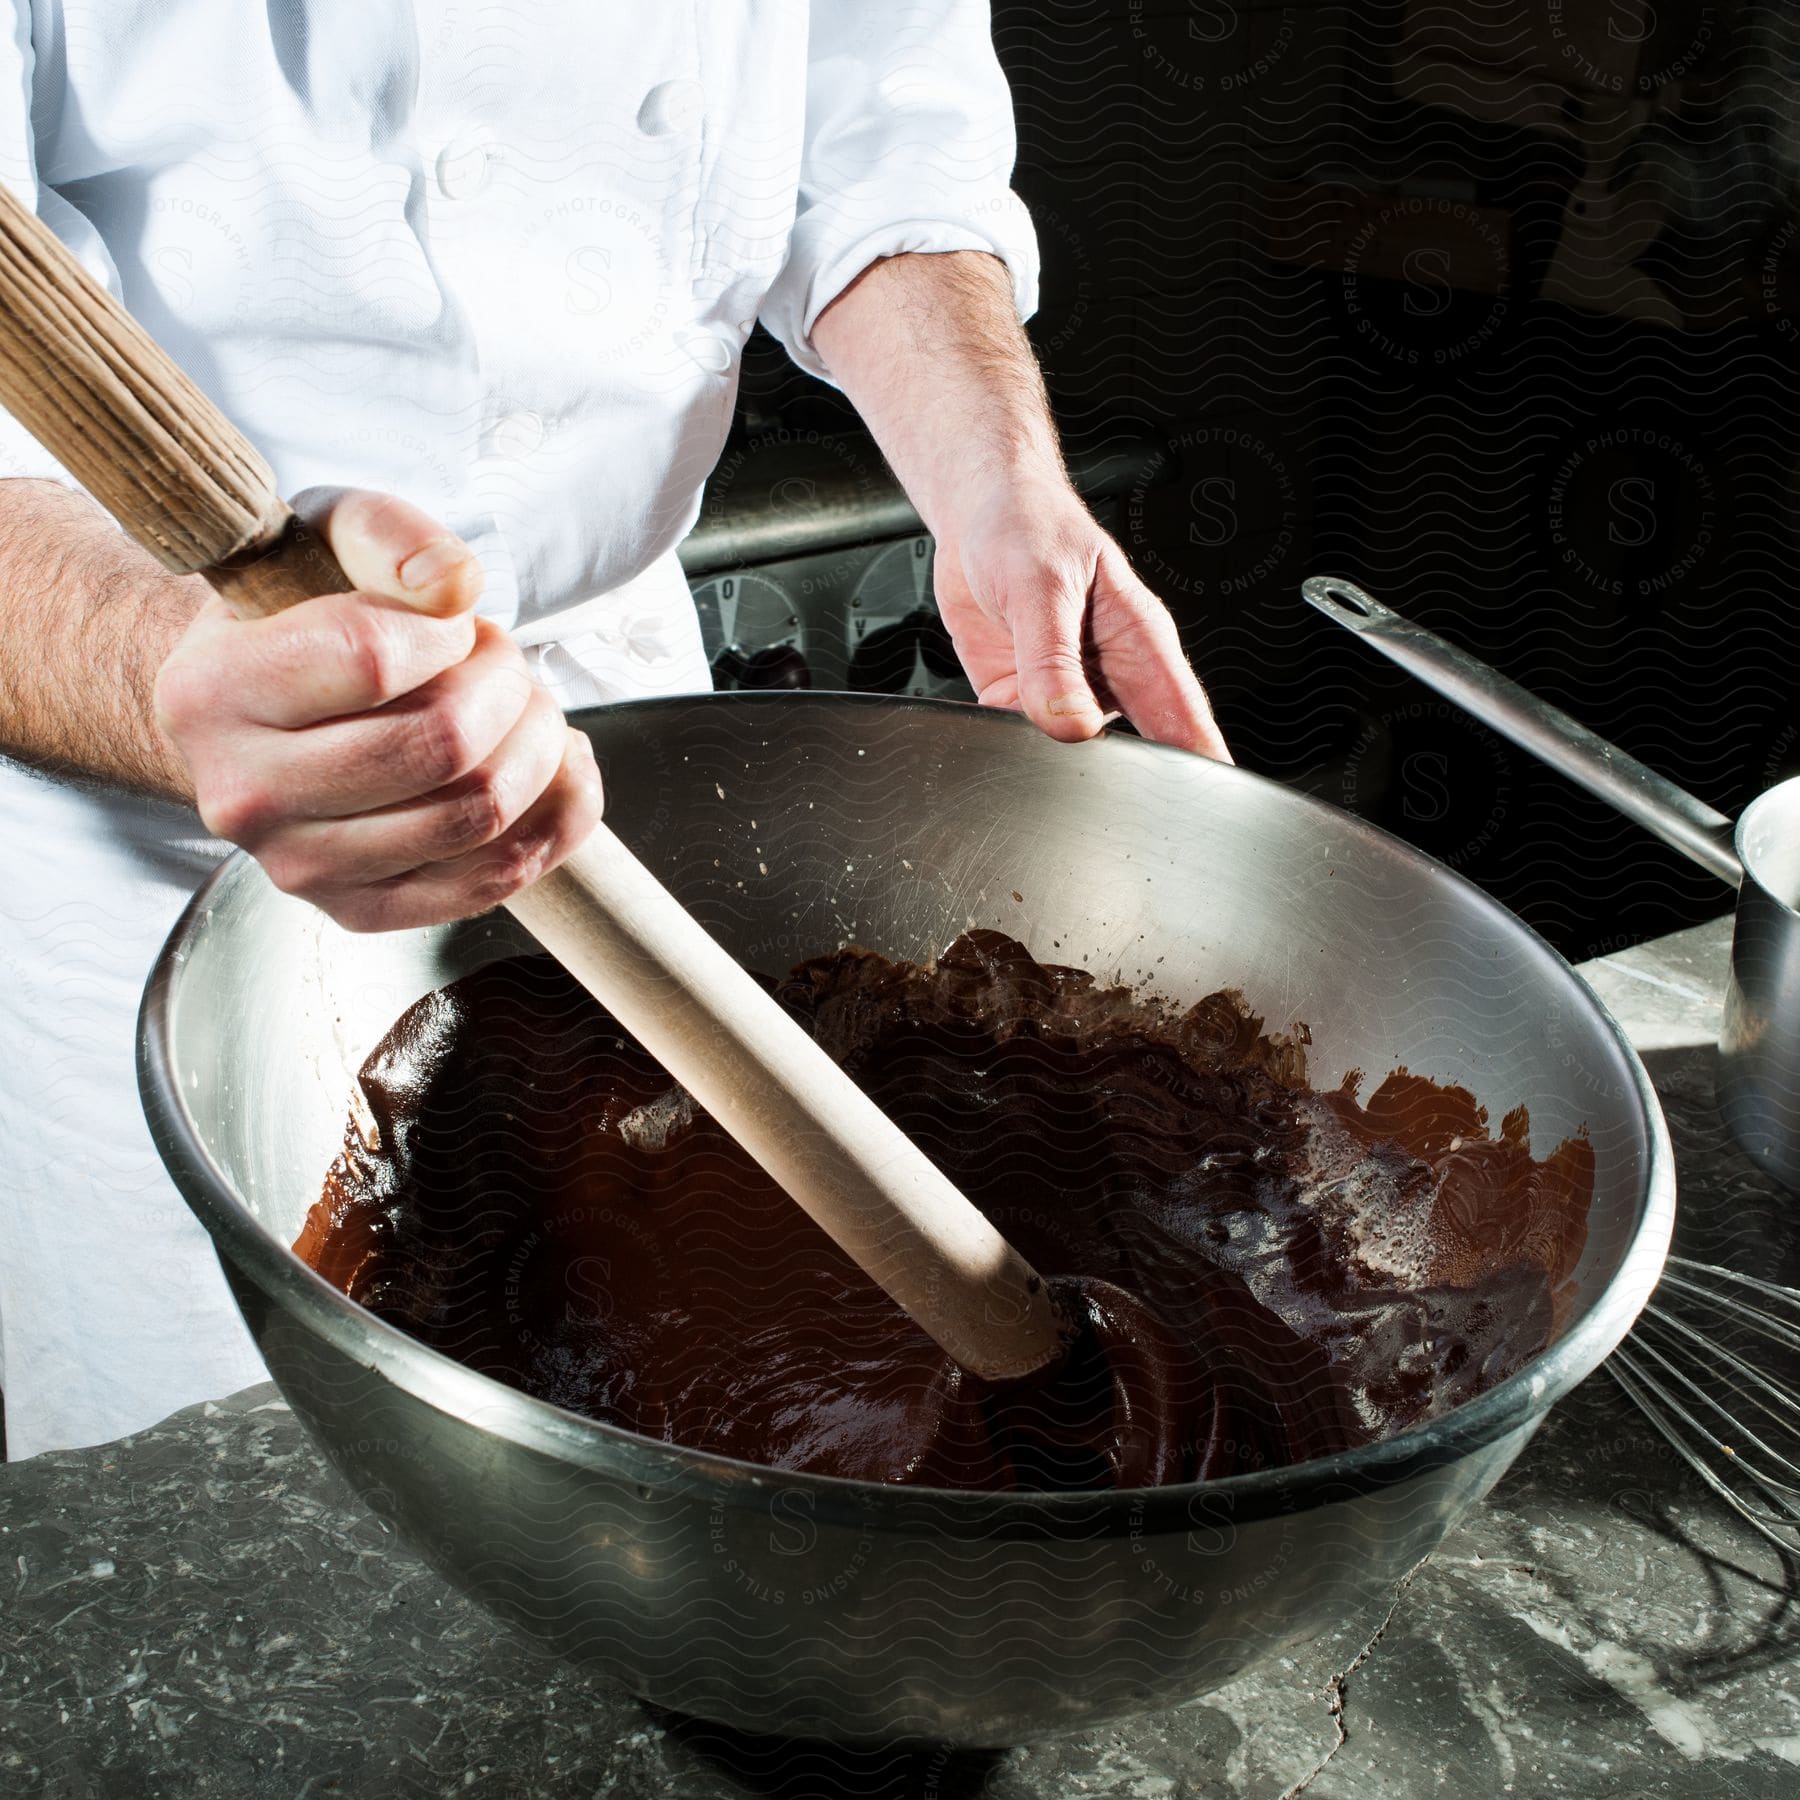 Stock photo of a person mixes ingredients in a bowl using a wooden utensil